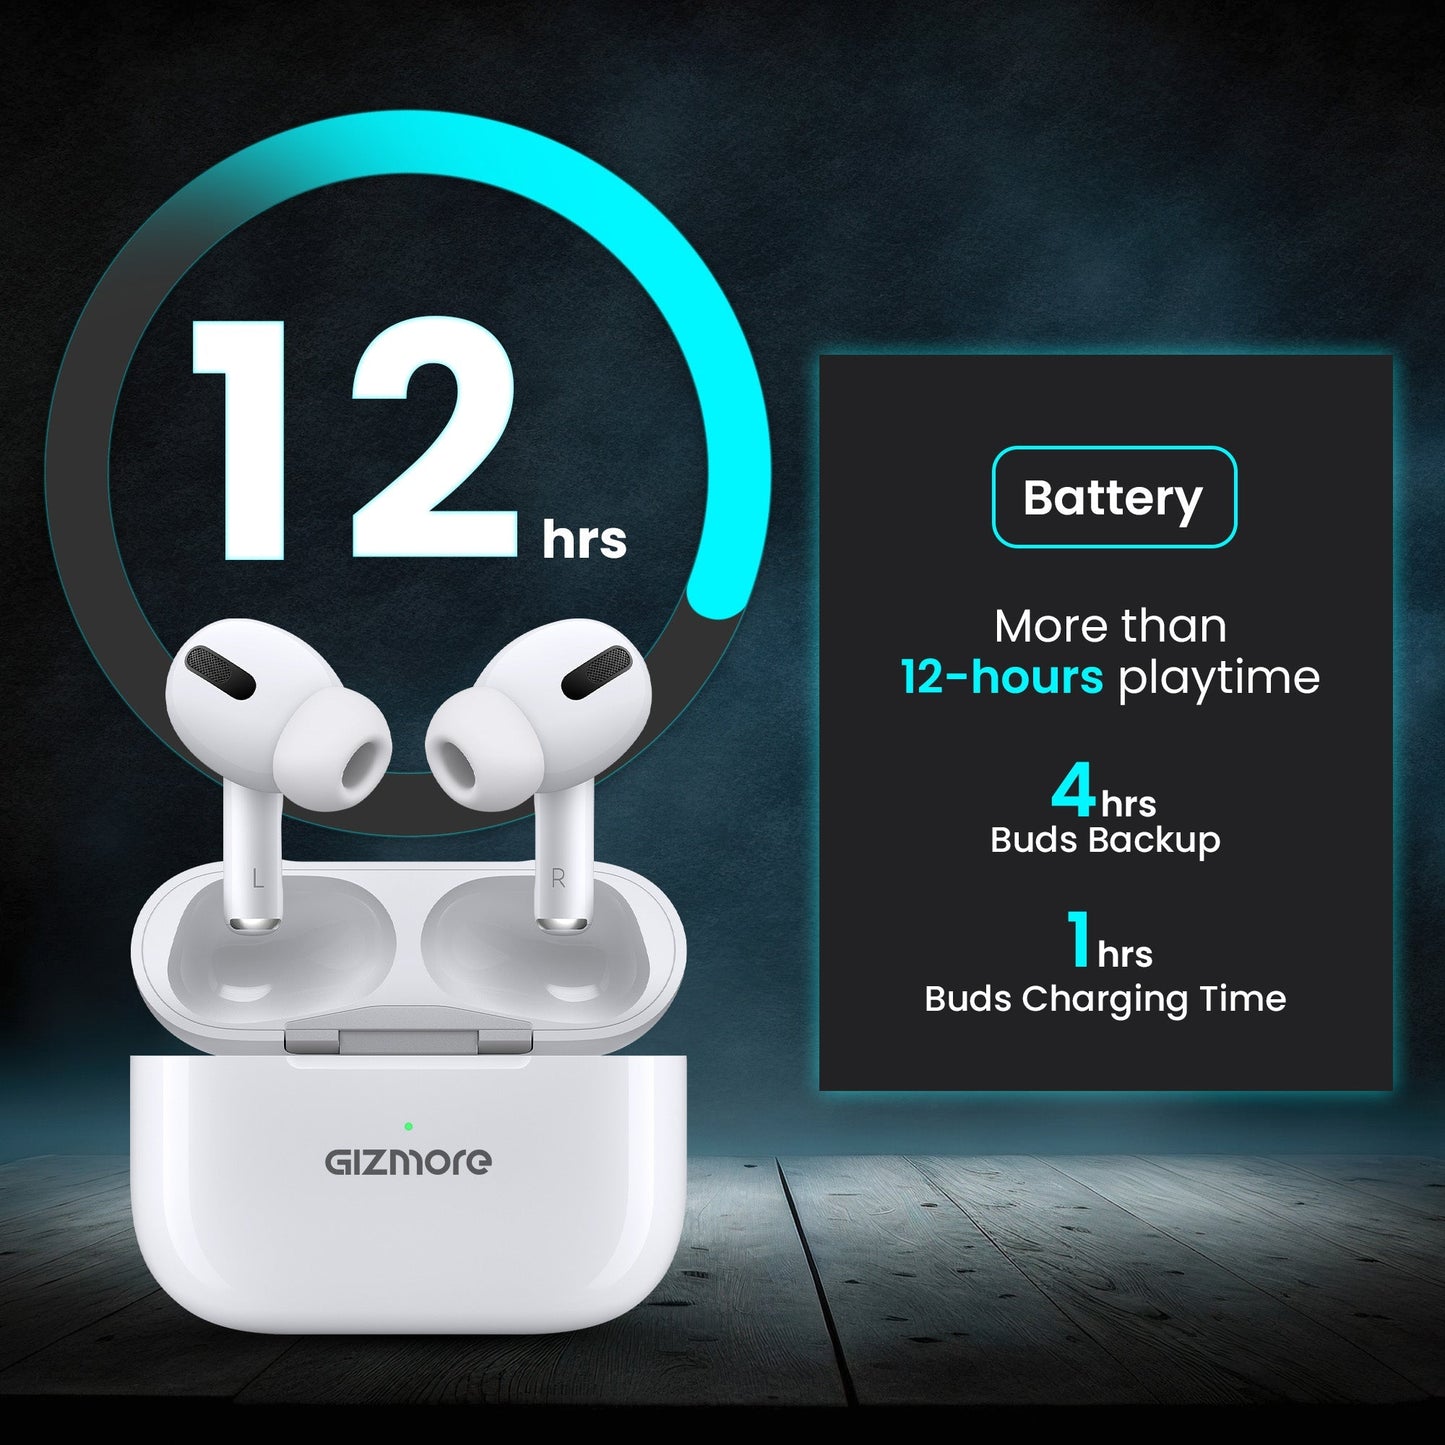 GIZMORE 862  TWS In-Ear Earbuds Type-C Fast Charging with 12 Hours Playtime  Bluetooth V5.013mm Bass Drivers Sweat  Water Resistant  Touch Controls  Voice Assistant Earbuds White